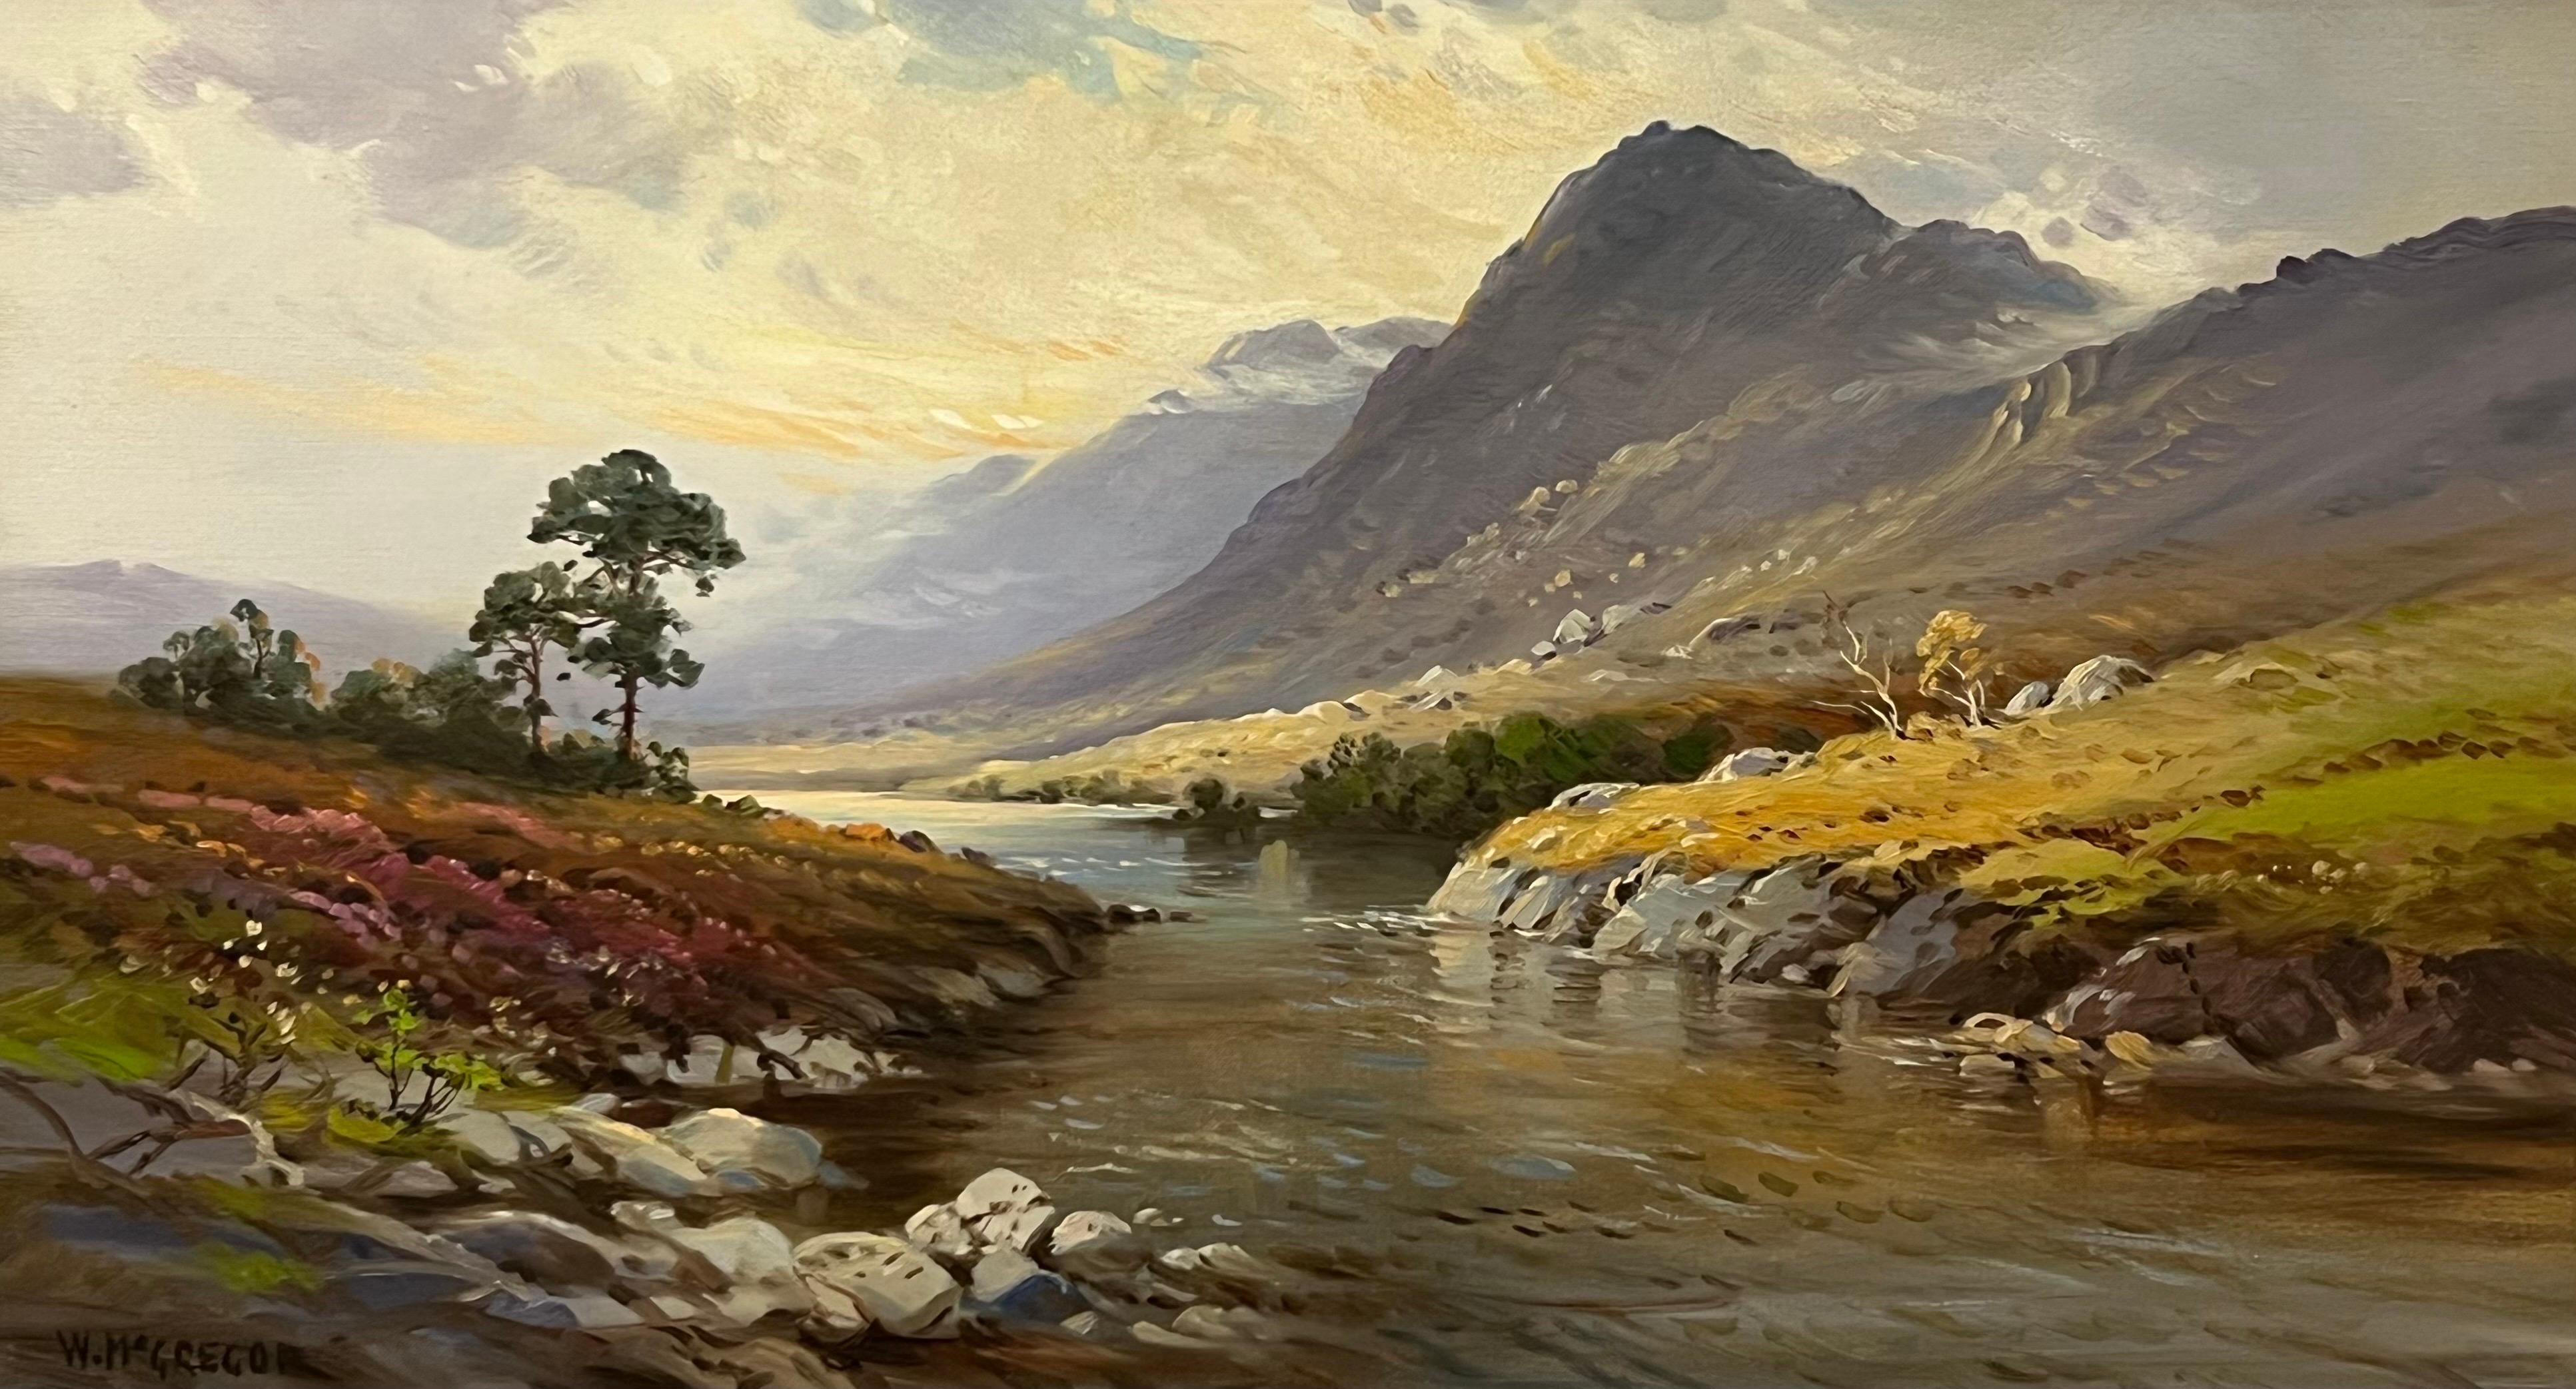 Loch Eilt in the Scottish Highlands Landscape Painting. A beautiful realist oil painting of the Scottish Highlands from a highly respected British Artist. 

Art measures 33 x 18 inches
Frame measures 38 x 23 inches

Loch Eilt sits between the